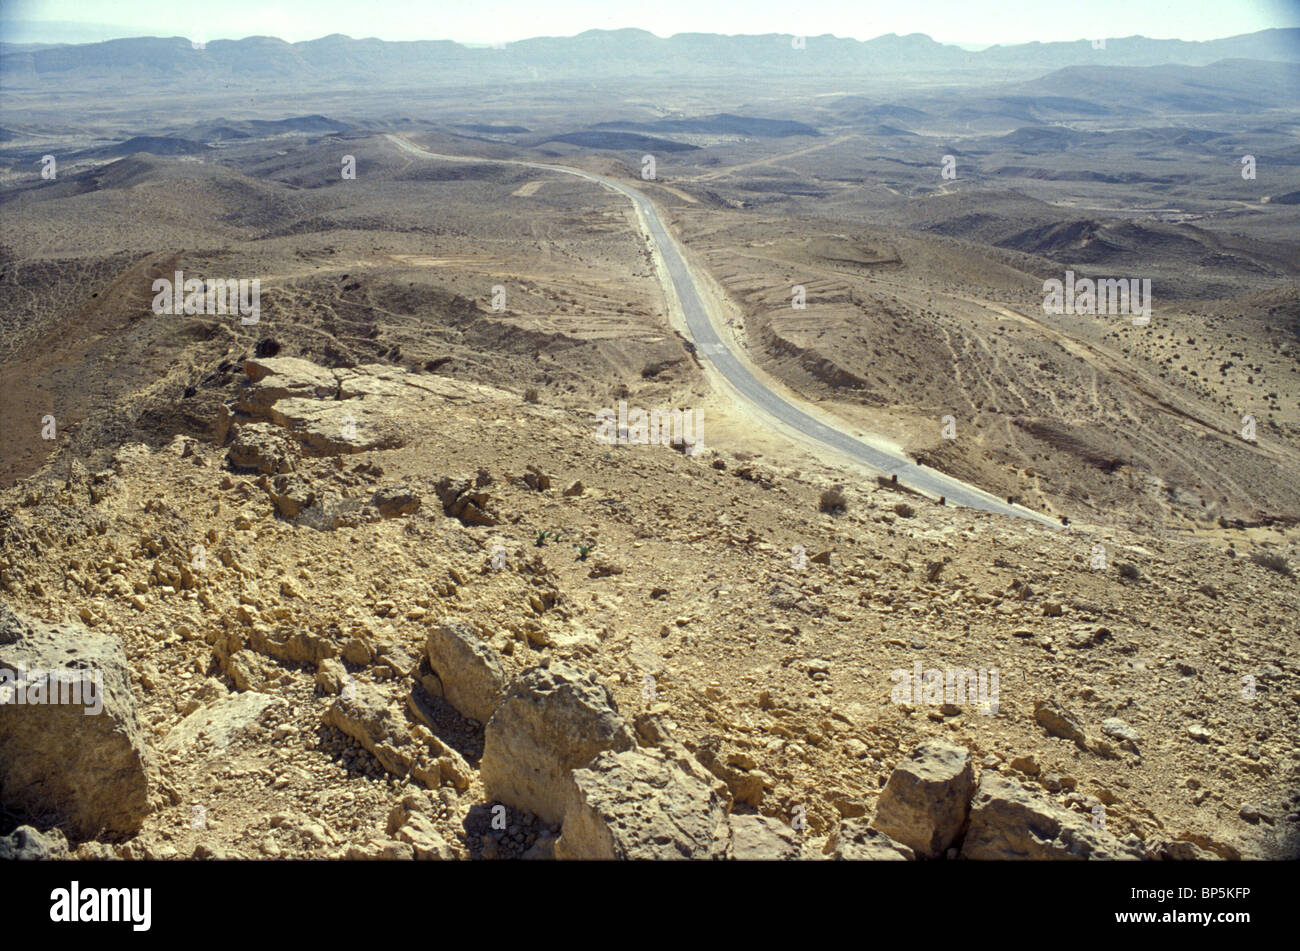 5197. AKRABIM, THE BIG CRATER IN THE CENTRAL NEGEV. Stock Photo